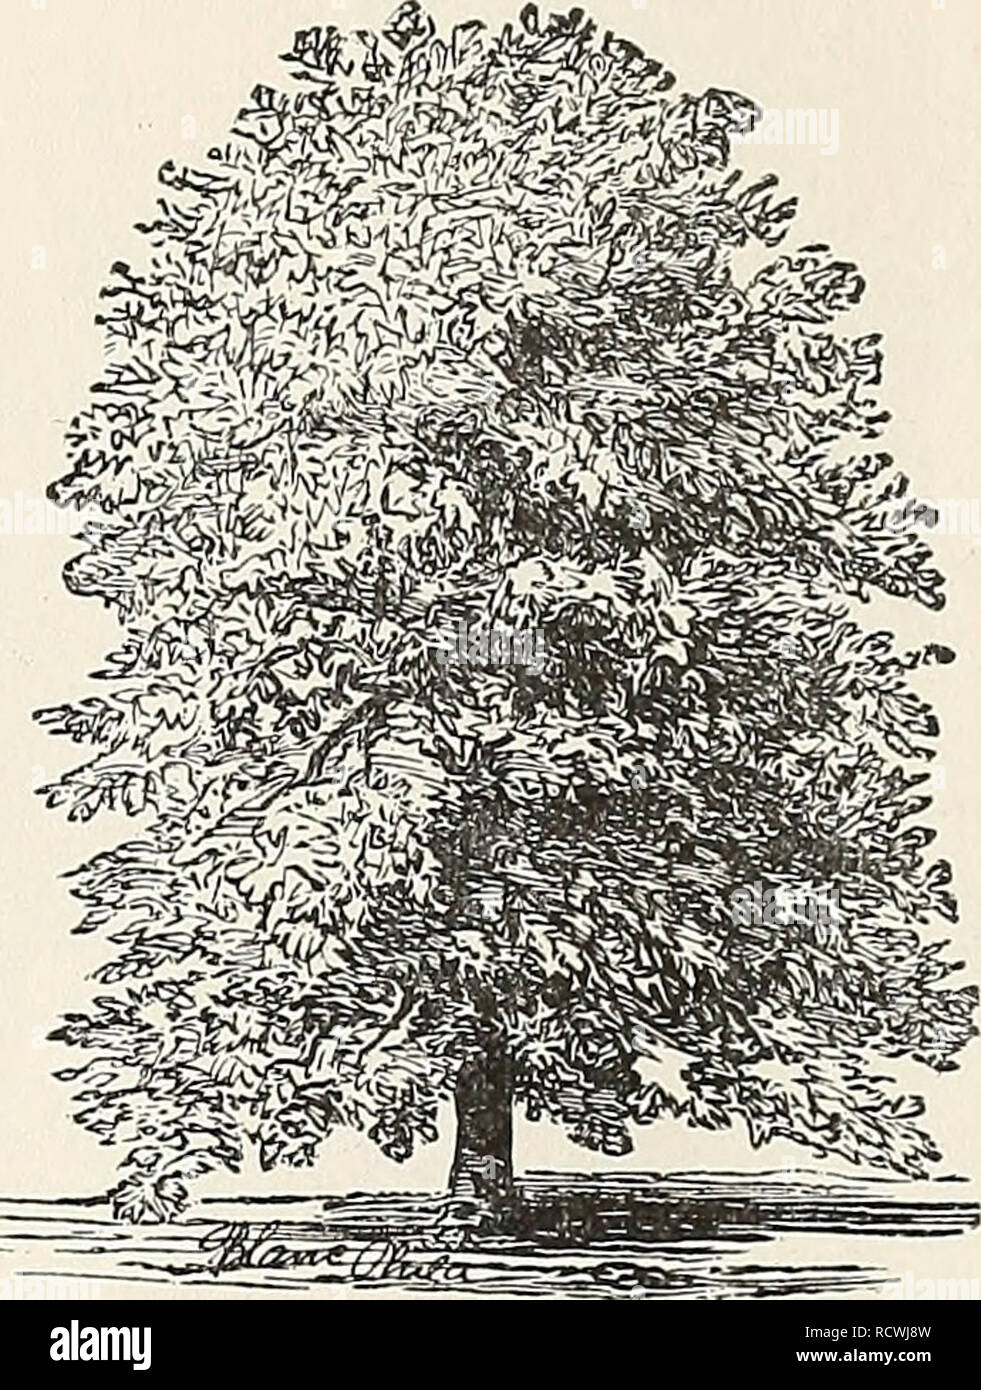 . Descriptive catalogue of fruits, and ornamental trees, garden fruits, roses, shrubs, etc.. Nurseries (Horticulture) Massachusetts Catalogs; Fruit trees Seedlings Catalogs; Fruit Catalogs; Trees Seedlings Catalogs; Roses Catalogs. 56 UPRIGHT DECIDUOUS TREES. -7; Poplar. ^.^ Carolina—Pyramidal in form, and robust in growtli. Leaves large, serrated and pale to deep green in color.. CAROLINA POPLAR. r Salisburea. Maiden Hair or Gingko Tree (Adiantifolia )—One of the most beautiful of lawn trees. A native of Japan. Of medium size, rapid growth, and rich, glossy, fern-like foliage. Rare and elegan Stock Photo